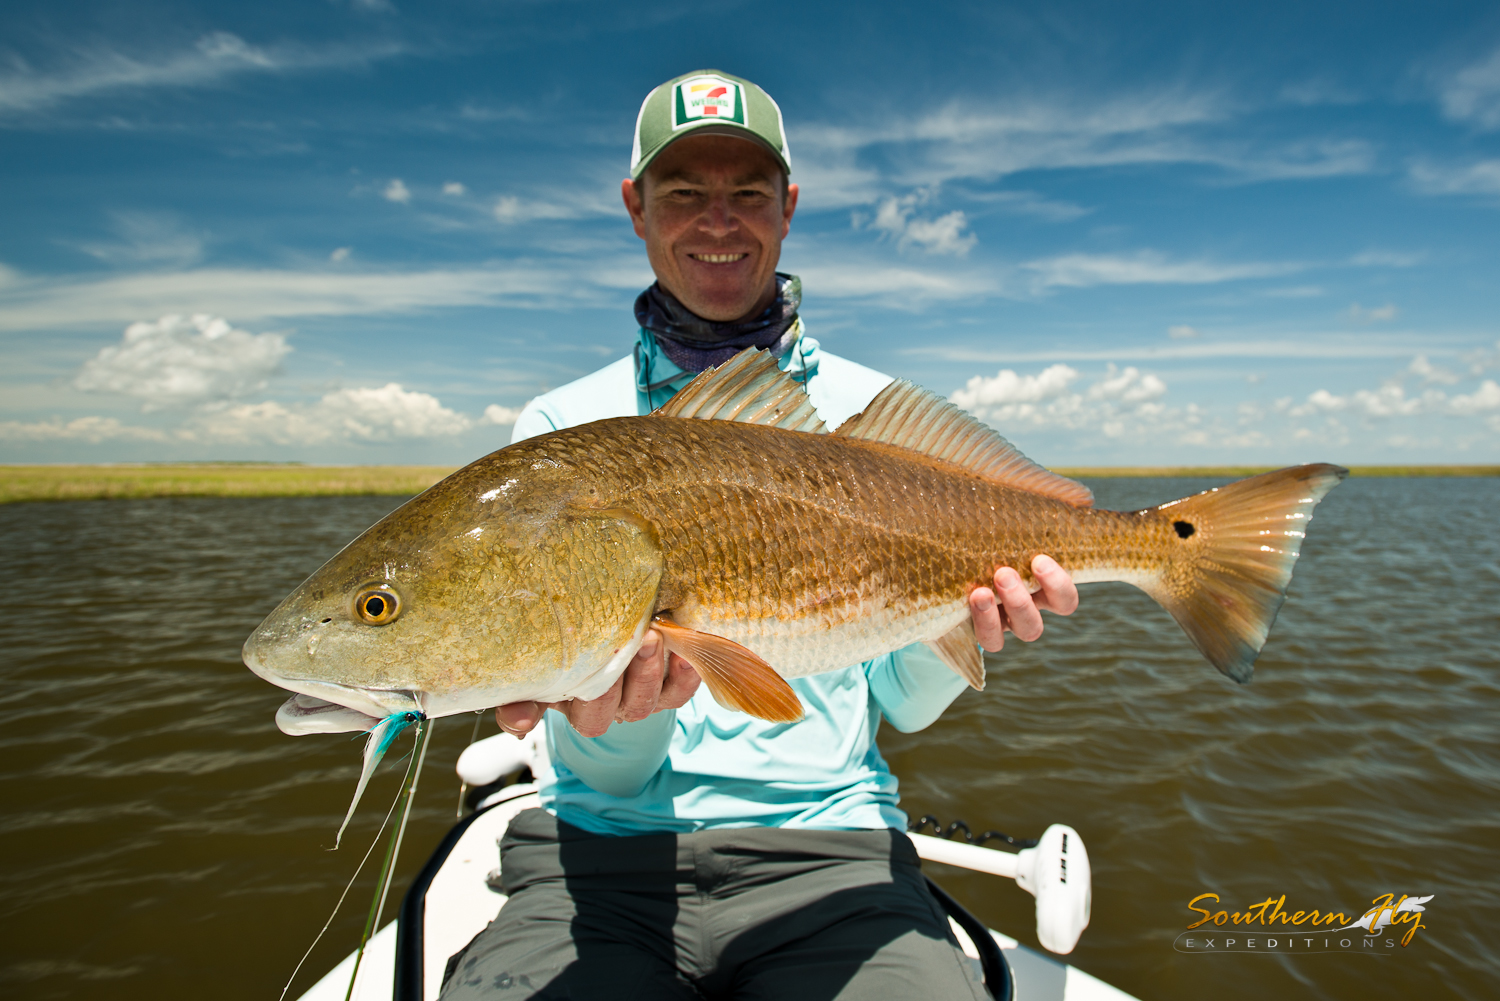 Mississippi Anglers Fly Fishing New Orleans Southern Fly Expeditions 